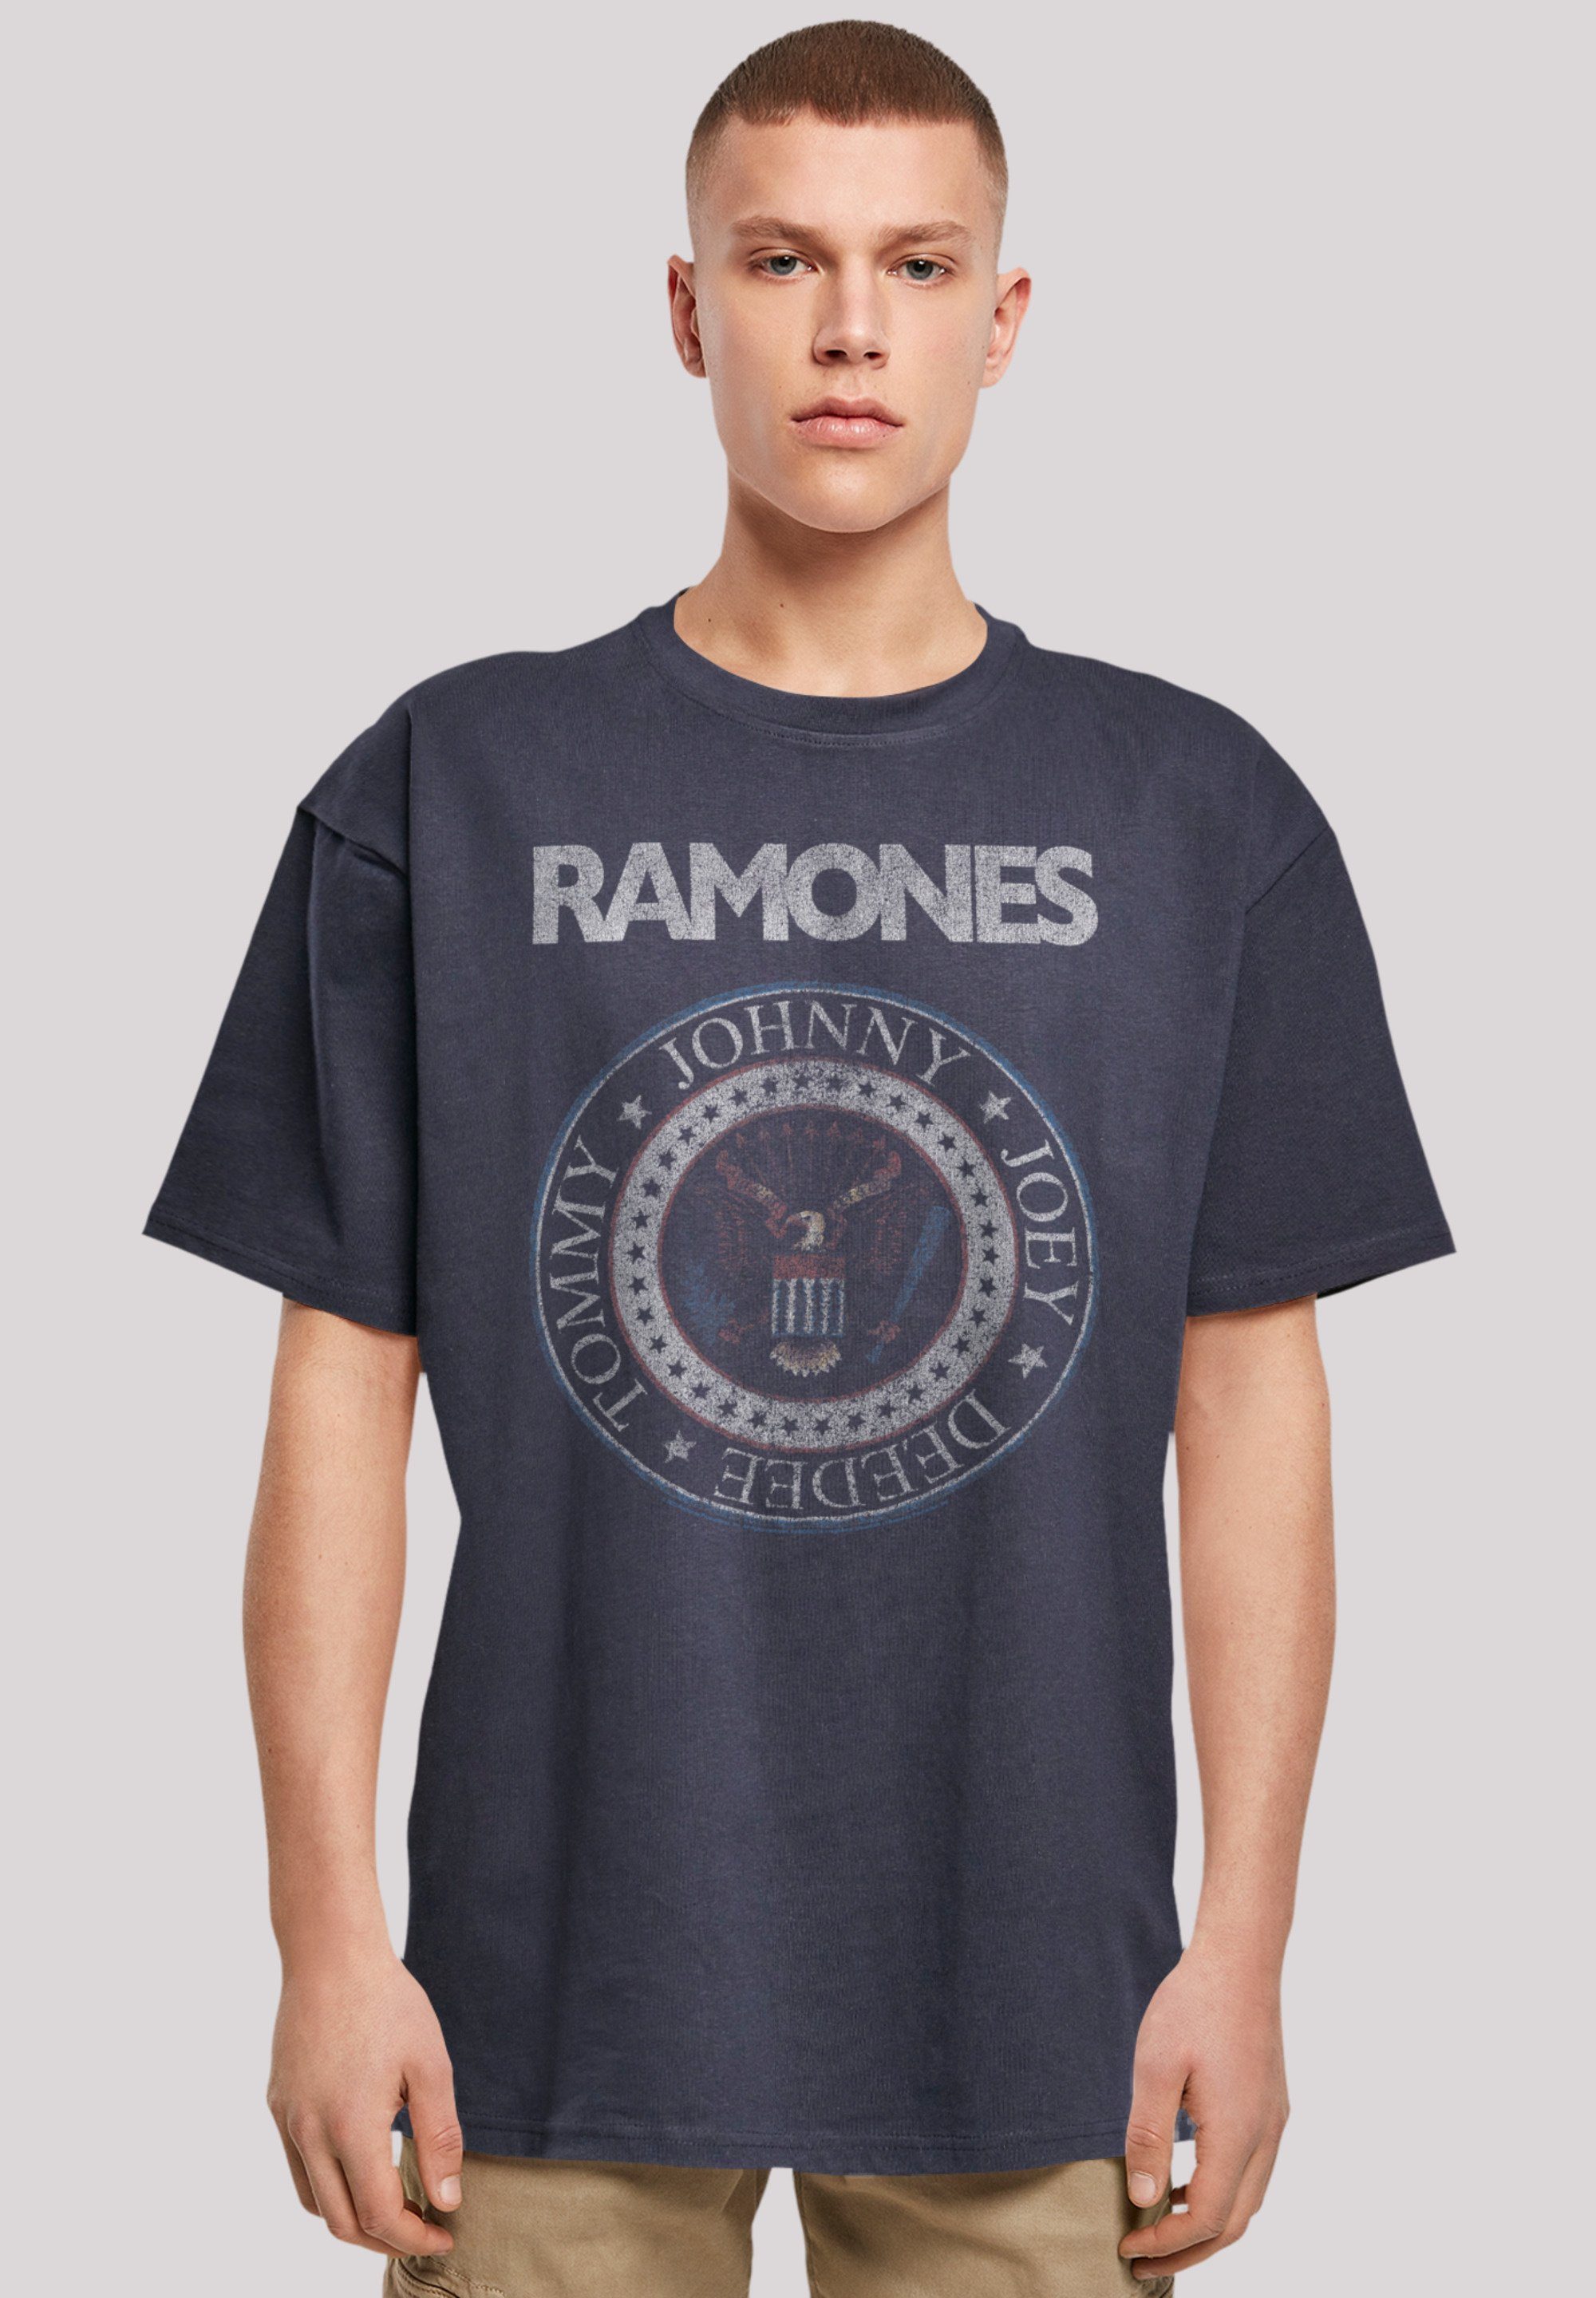 F4NT4STIC T-Shirt Ramones Rock Musik Band Red White And Seal Premium Qualität, Band, Rock-Musik navy